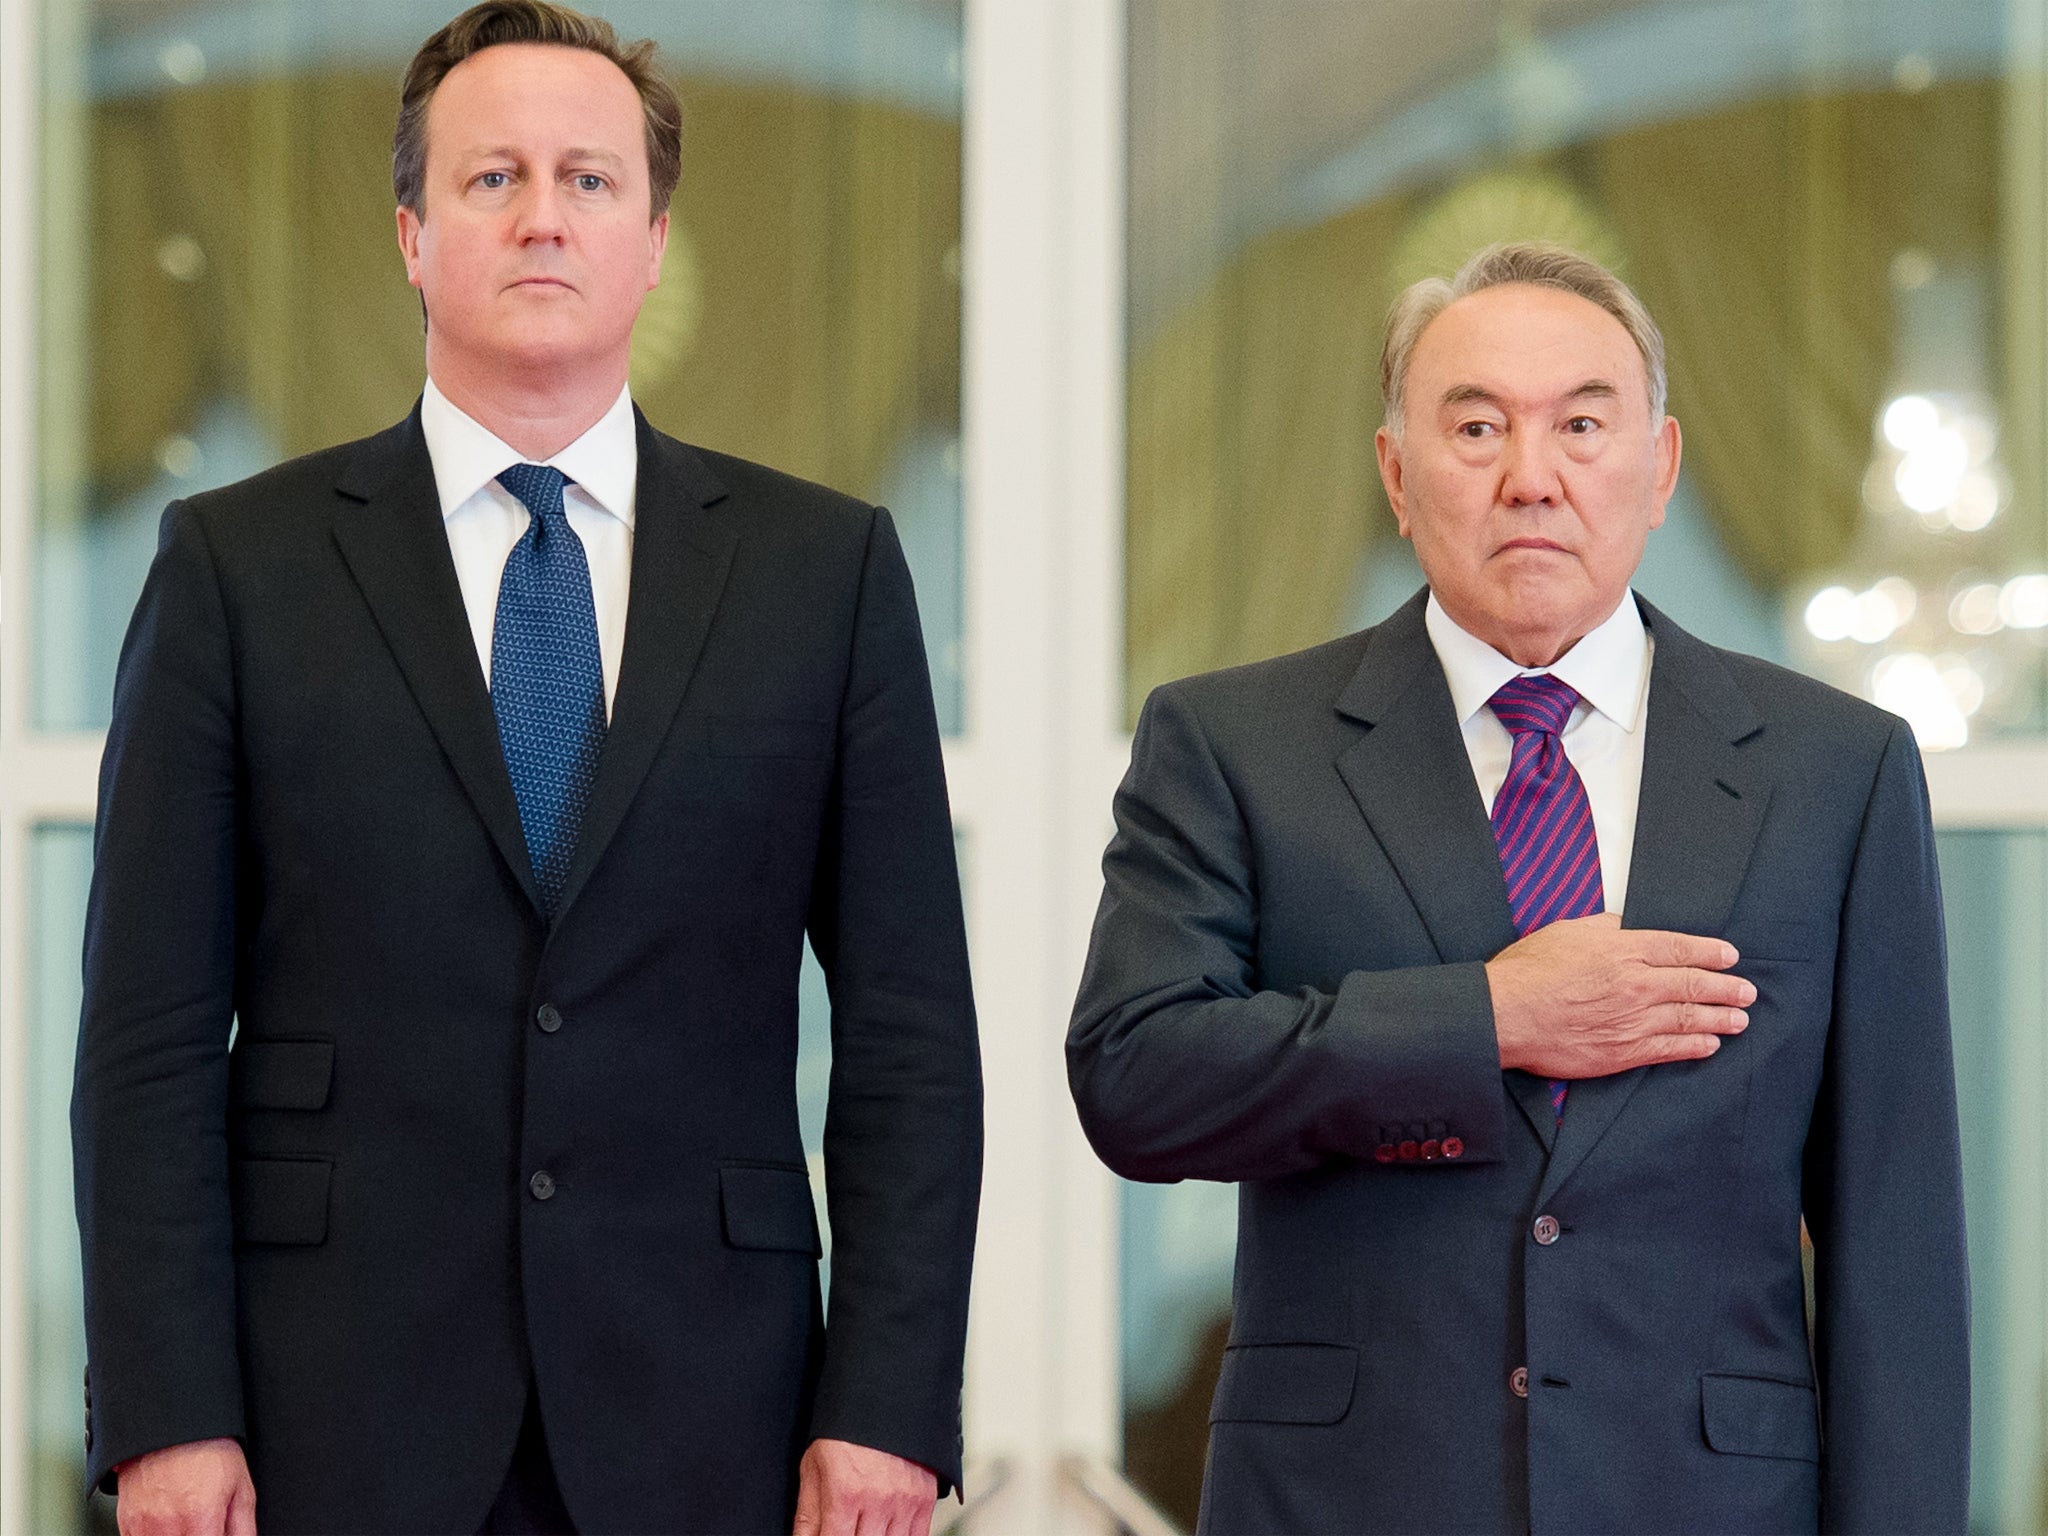 Kazakh President welcomed David Cameron to Astana earlier this month